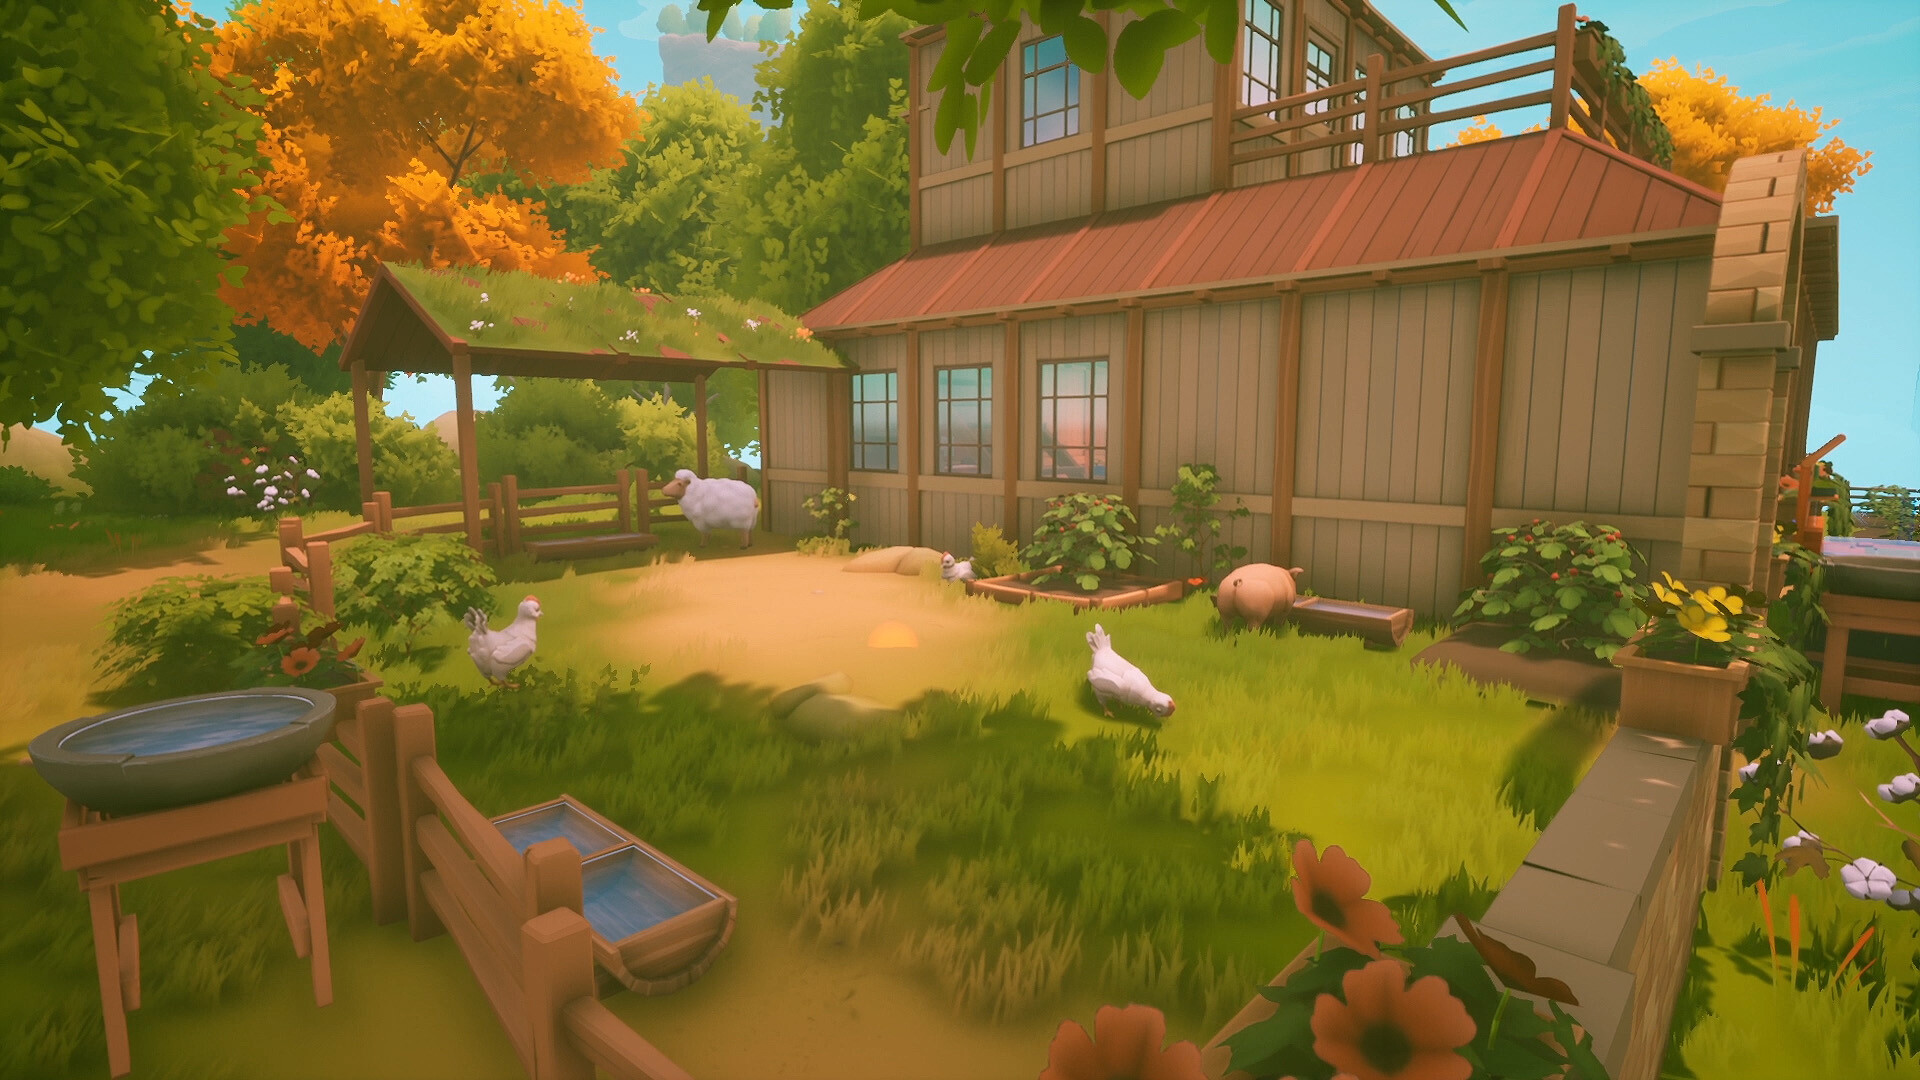 Cozy survival crafting game Solarpunk coming to Switch